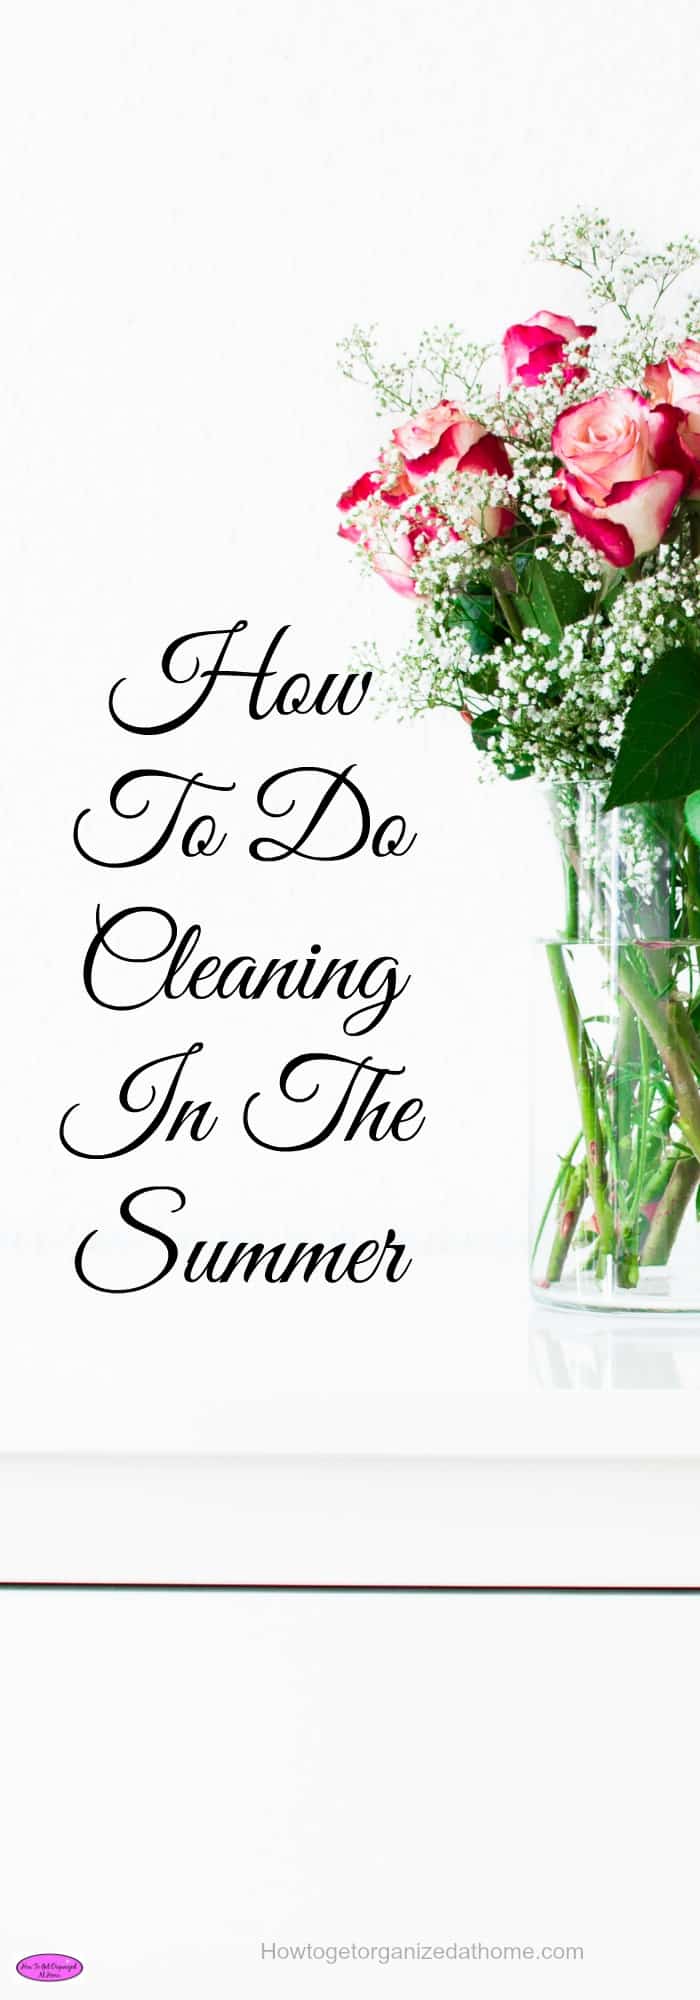 Cleaning in the summer is no fun when you would rather be spending quality time with family. However, it is possible to do both!